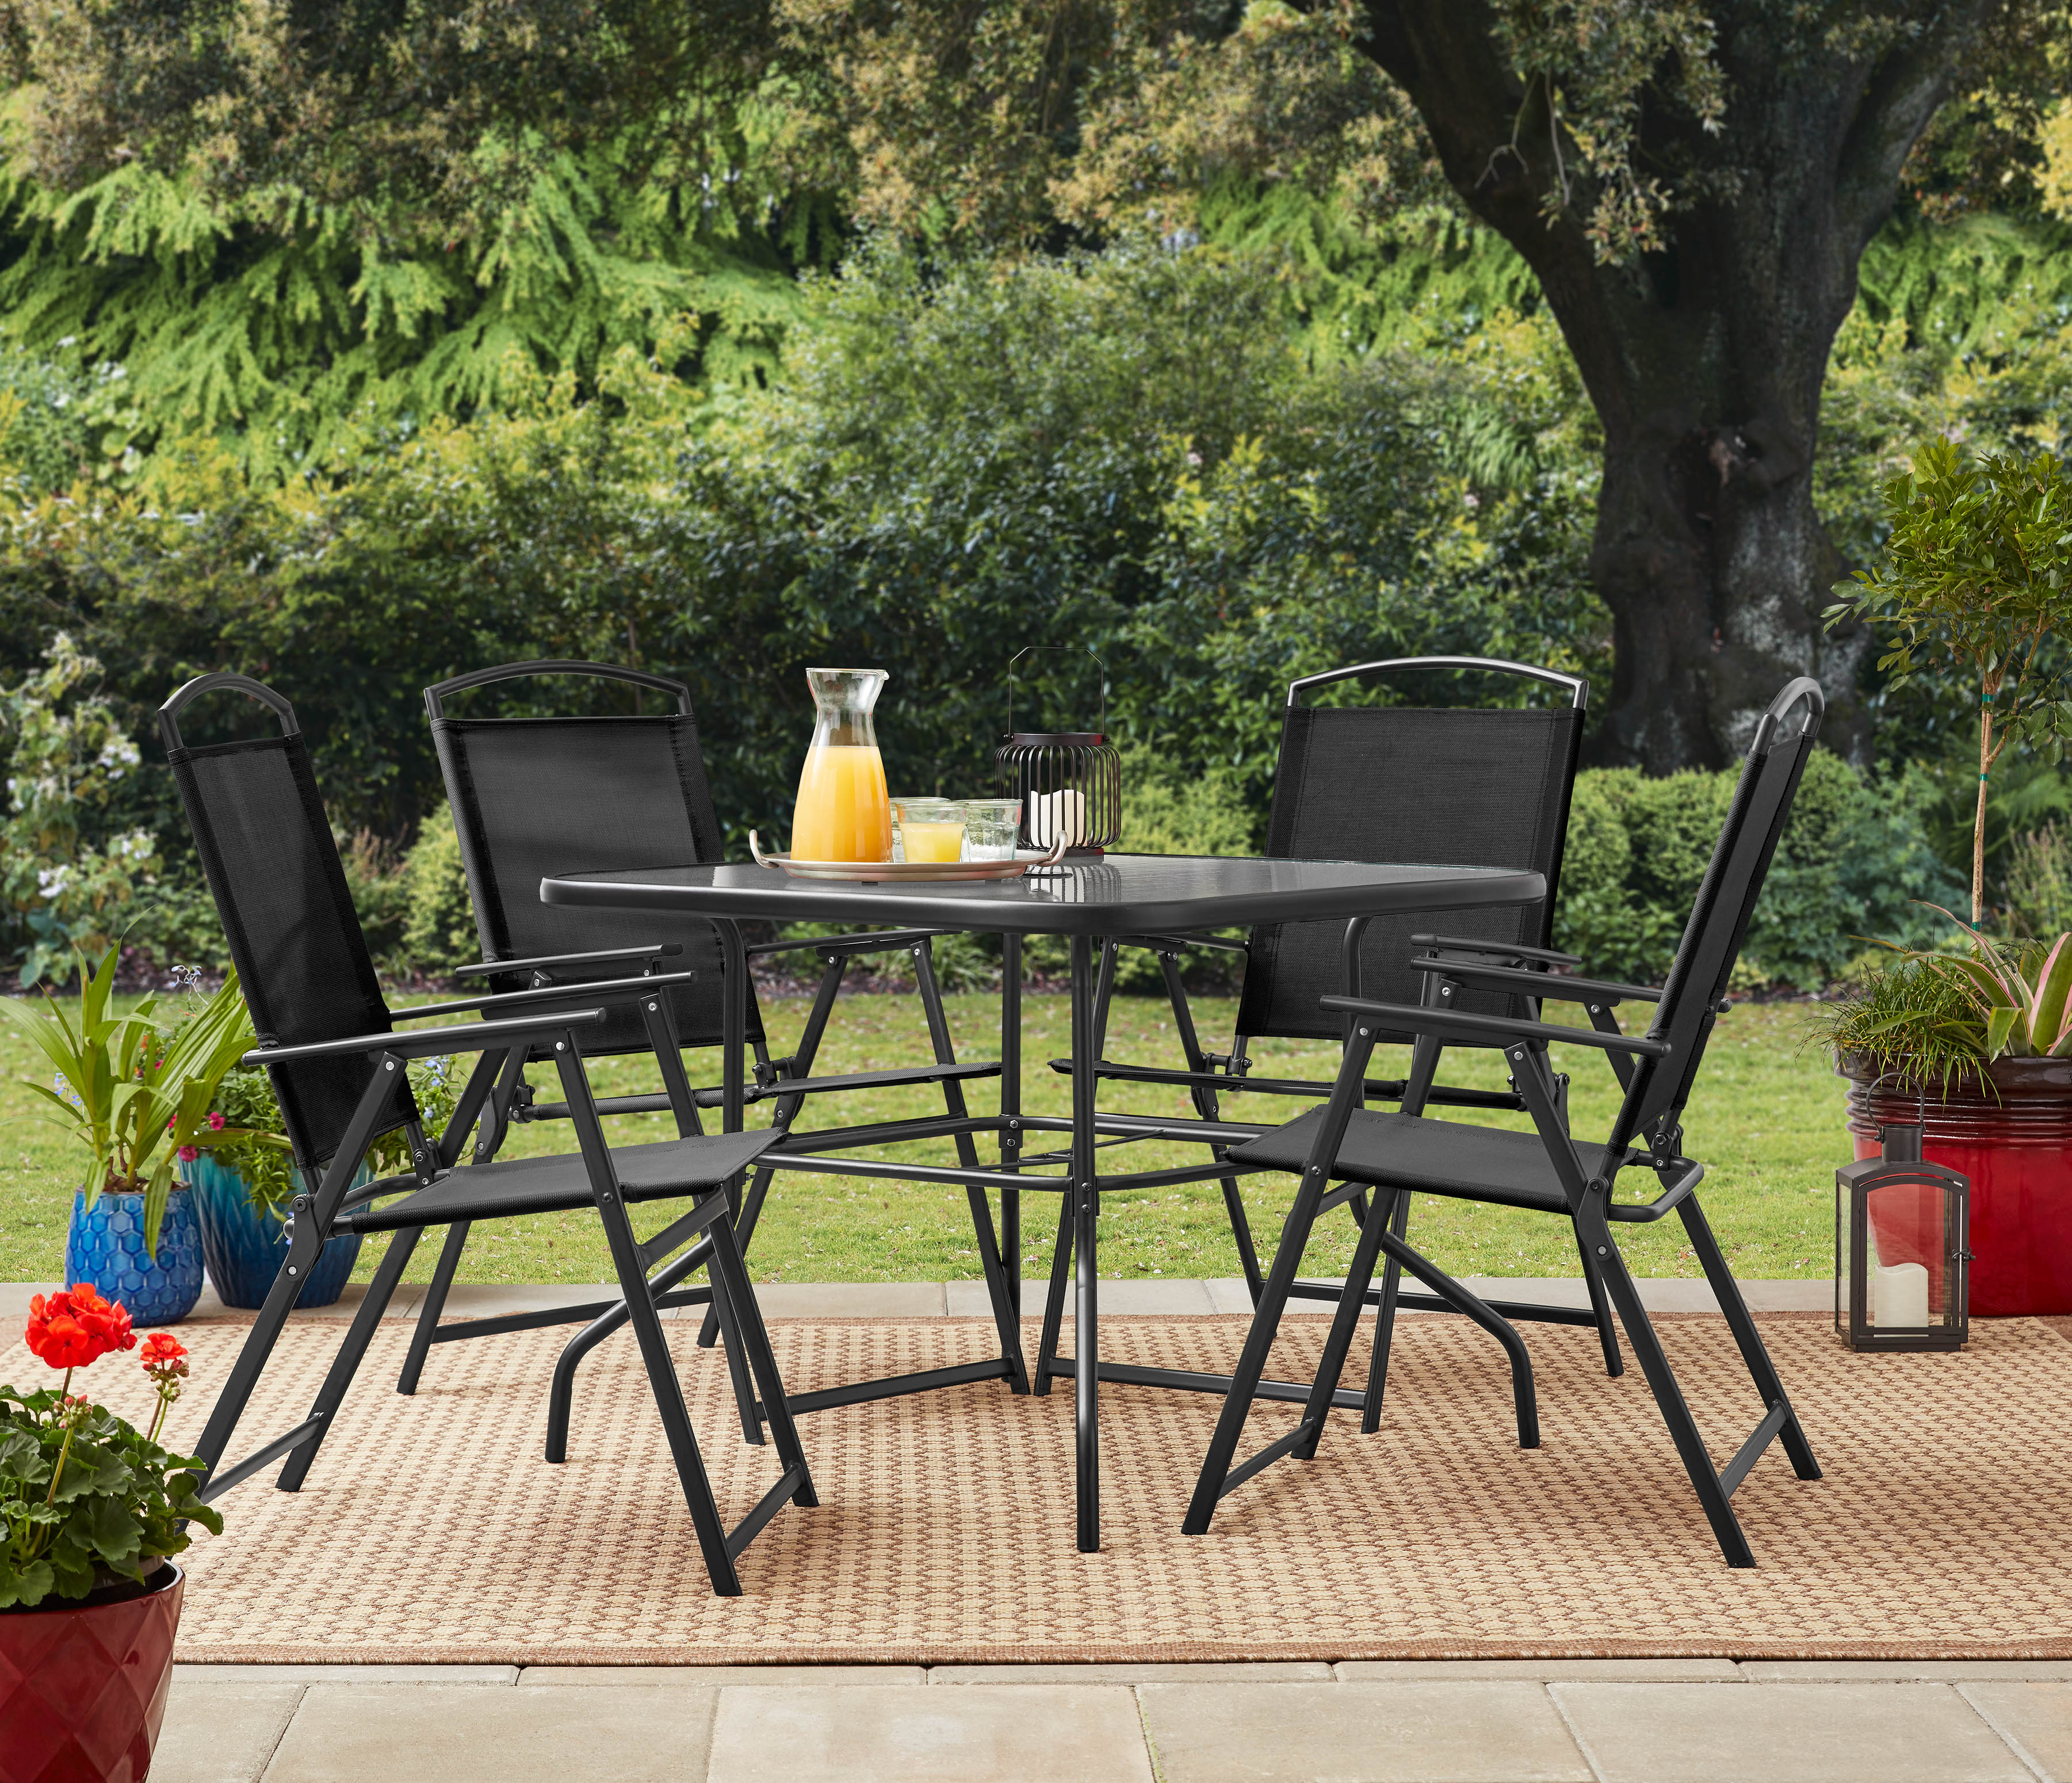 Mainstays Heritage Park Outdoor Patio 5 Piece Dining Set, 4 person seating, Black - image 1 of 10